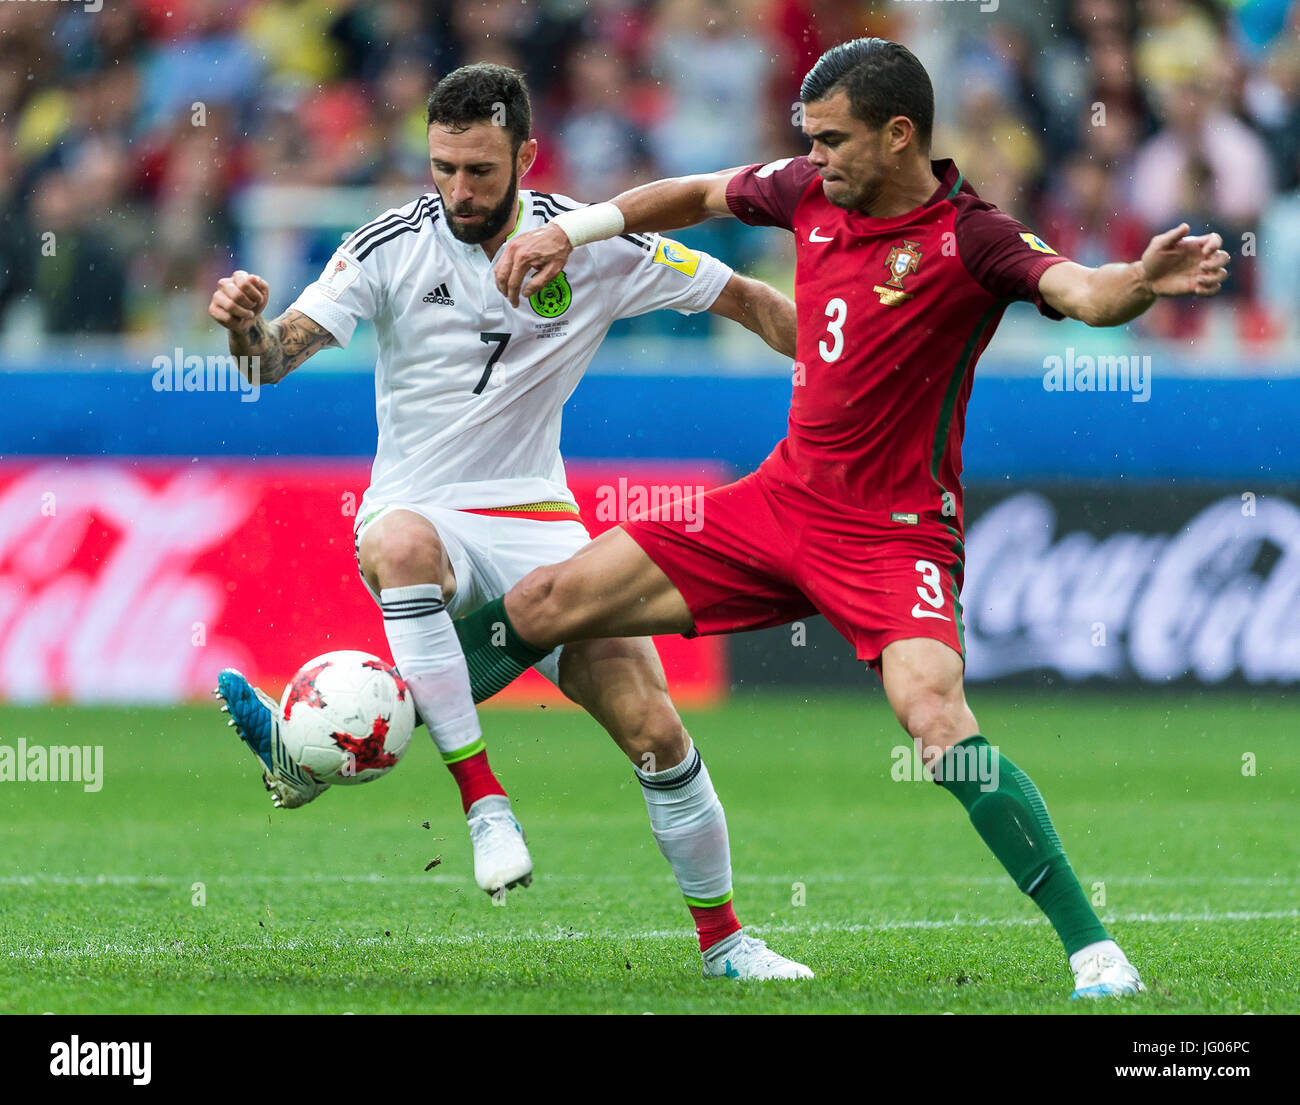 Moscow, Russia. 2nd July, 2017. Pepe (R) of Portugal vies with Miguel Layun of Mexico during the match for 3rd place between Portugal and Mexico at the 2017 FIFA Confederations Cup in Moscow, Russia, on July 2, 2017. Portugal won 2-1. Credit: Evgeny SInitsyn/Xinhua/Alamy Live News Stock Photo